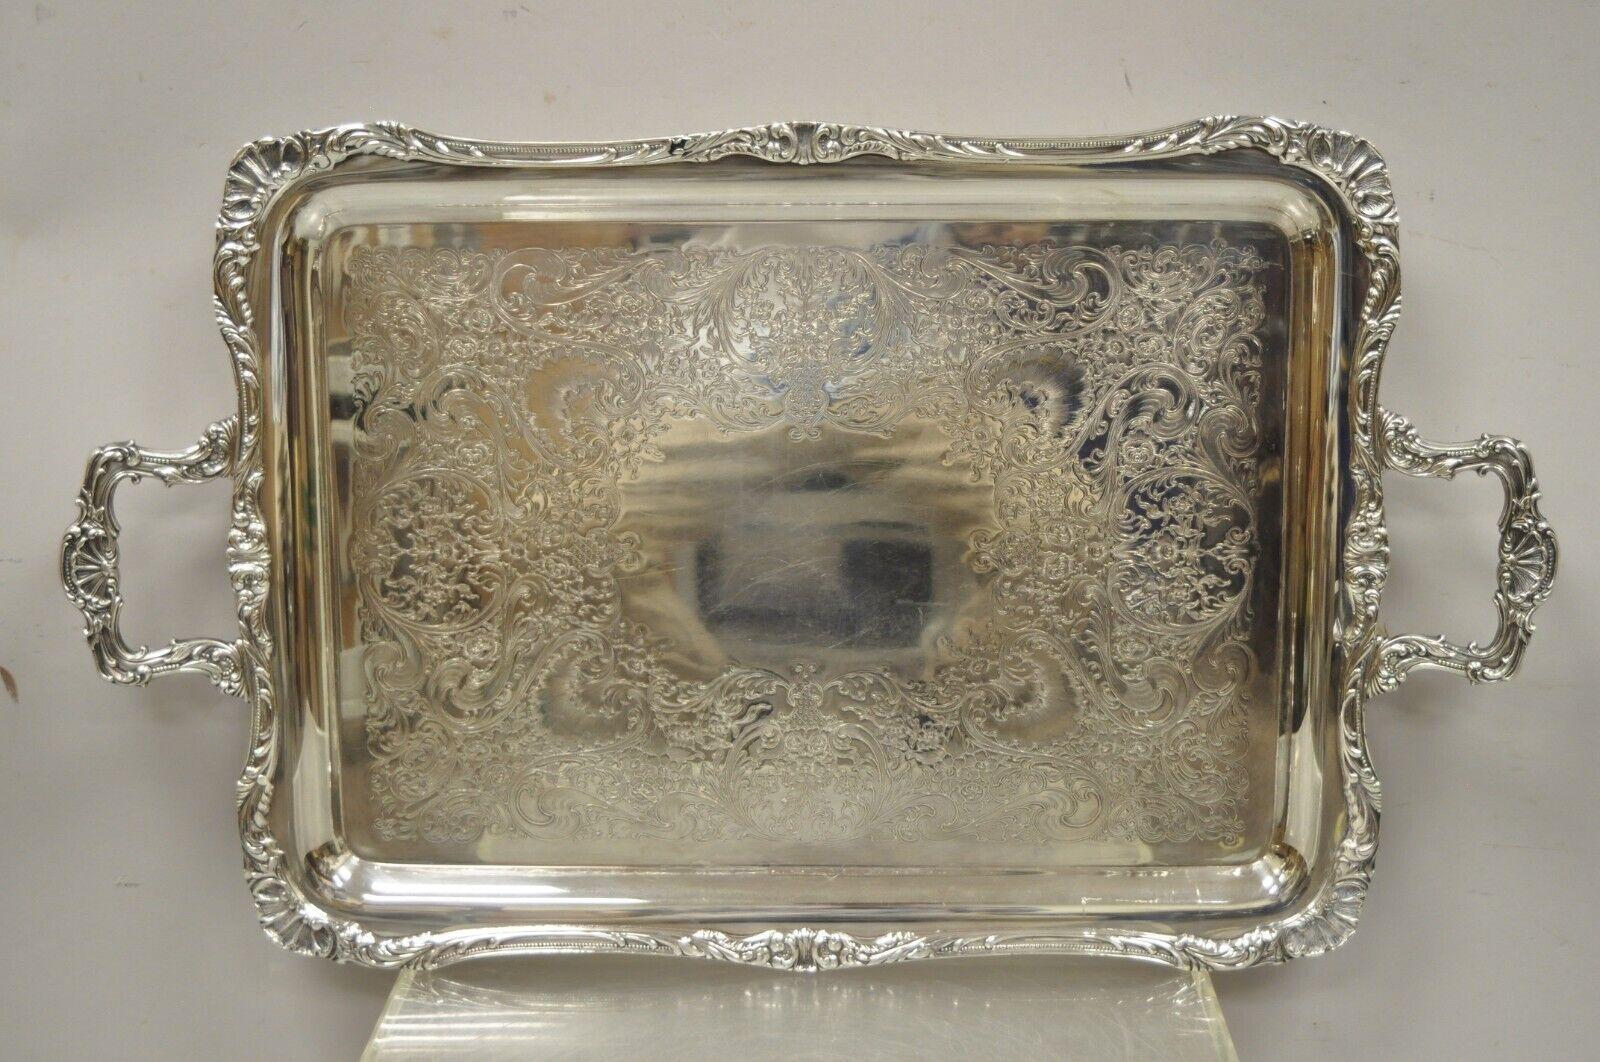 WM Rogers & Sons Spring Flowers 2092 Silver Plated Platter Serving Tray For Sale 4